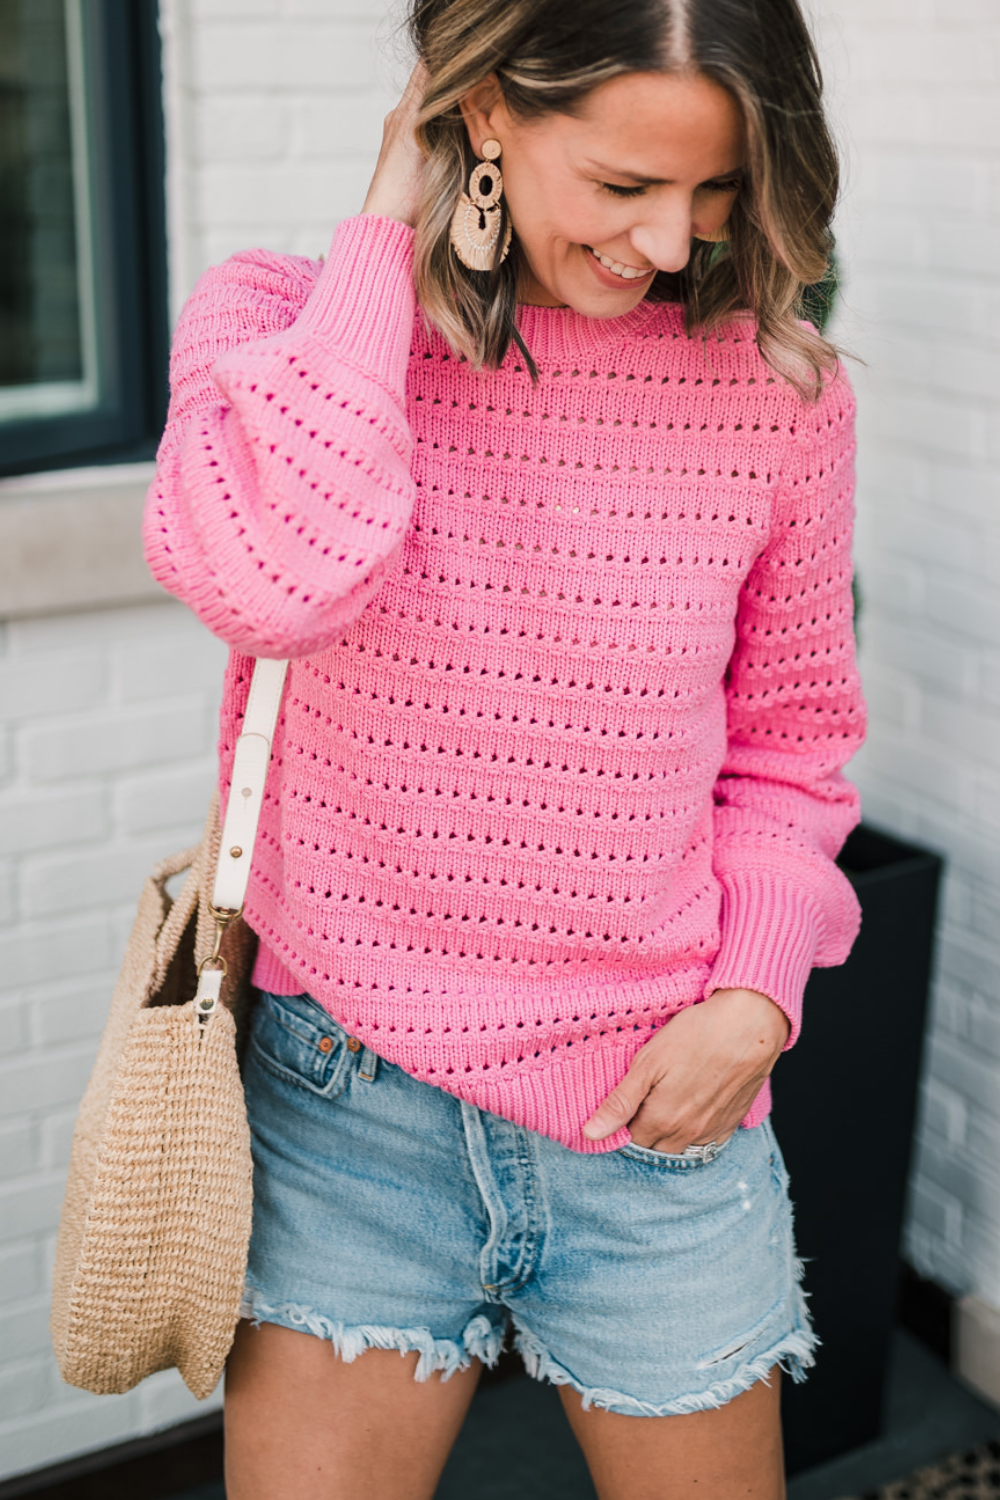 Suzanne wearing a pink sweater, denim shorts, and a round bag